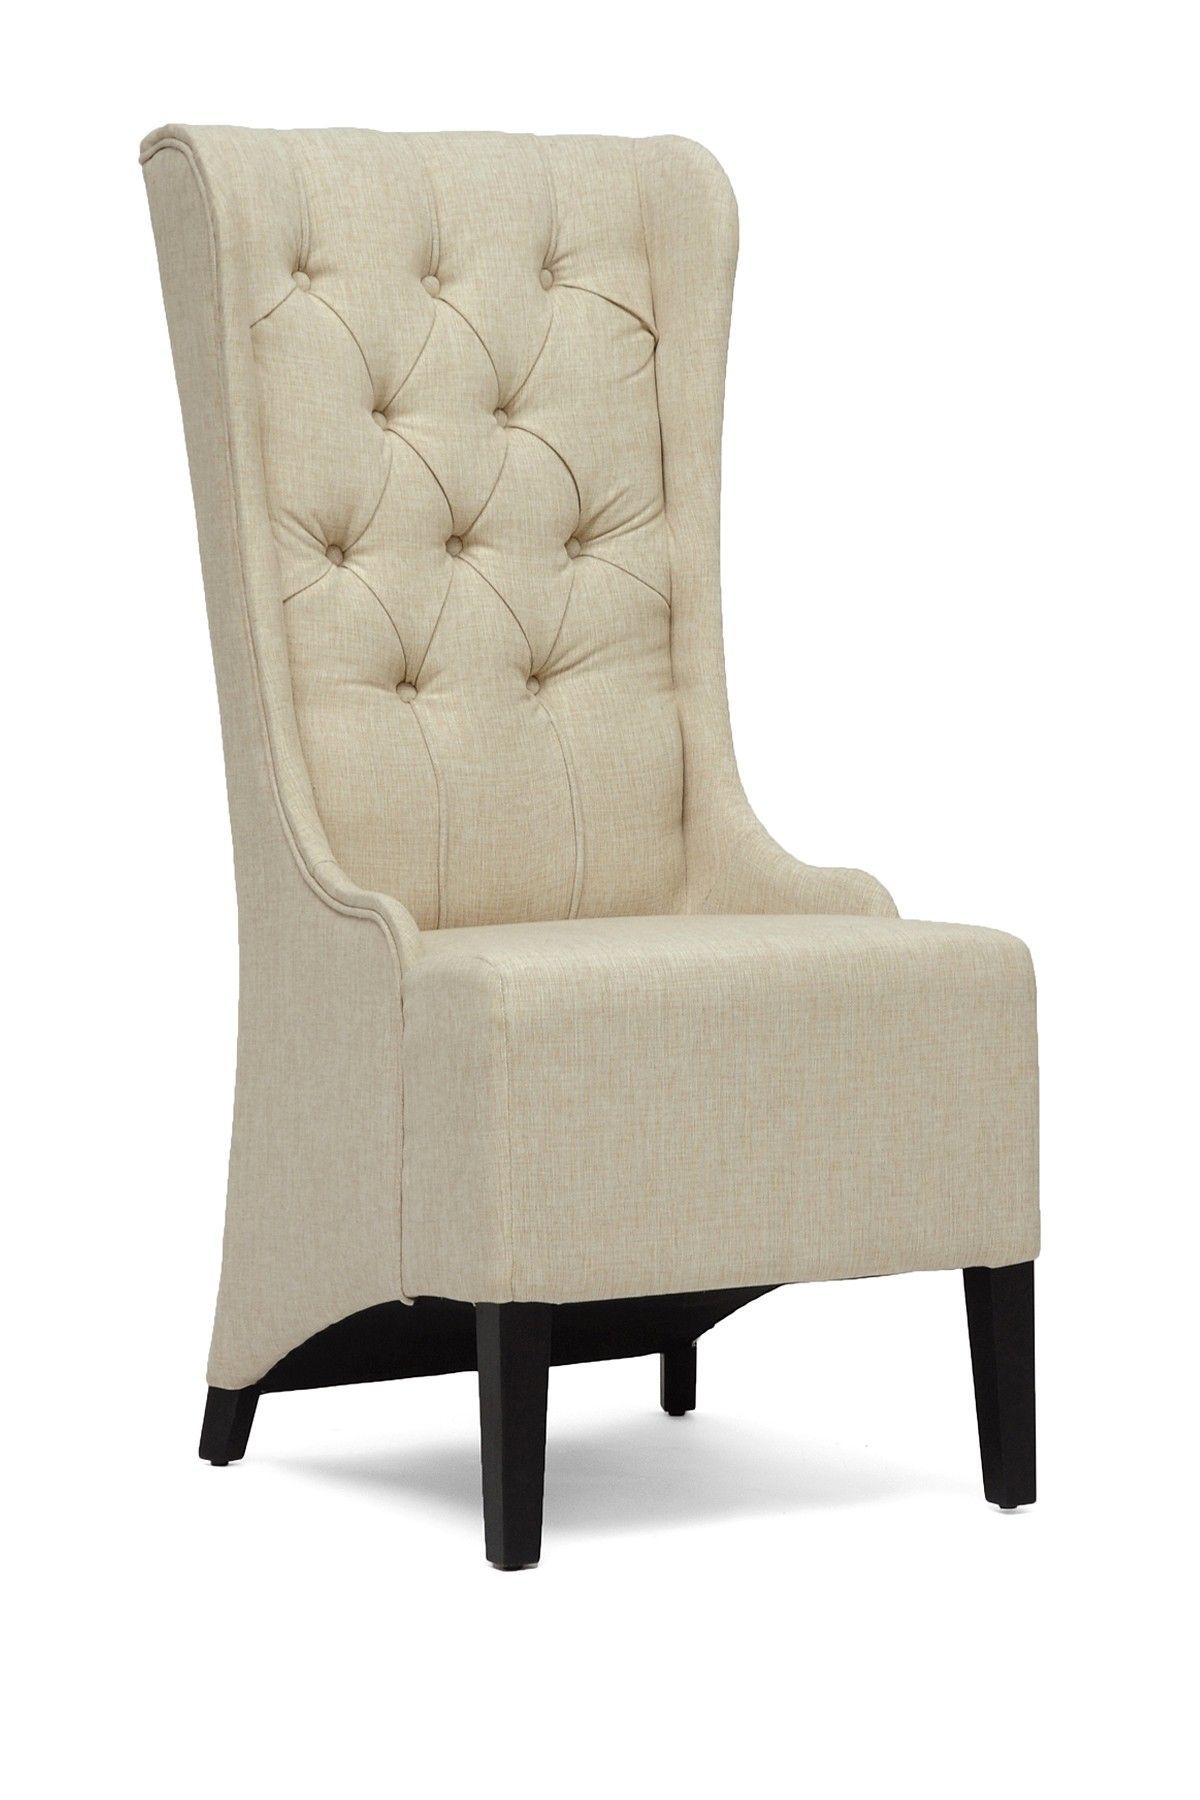 On Hautelook: | Beige Vincent Linen Modern Accent Chair | Linen Accent Pertaining To Light Beige Round Accent Stools (View 3 of 20)